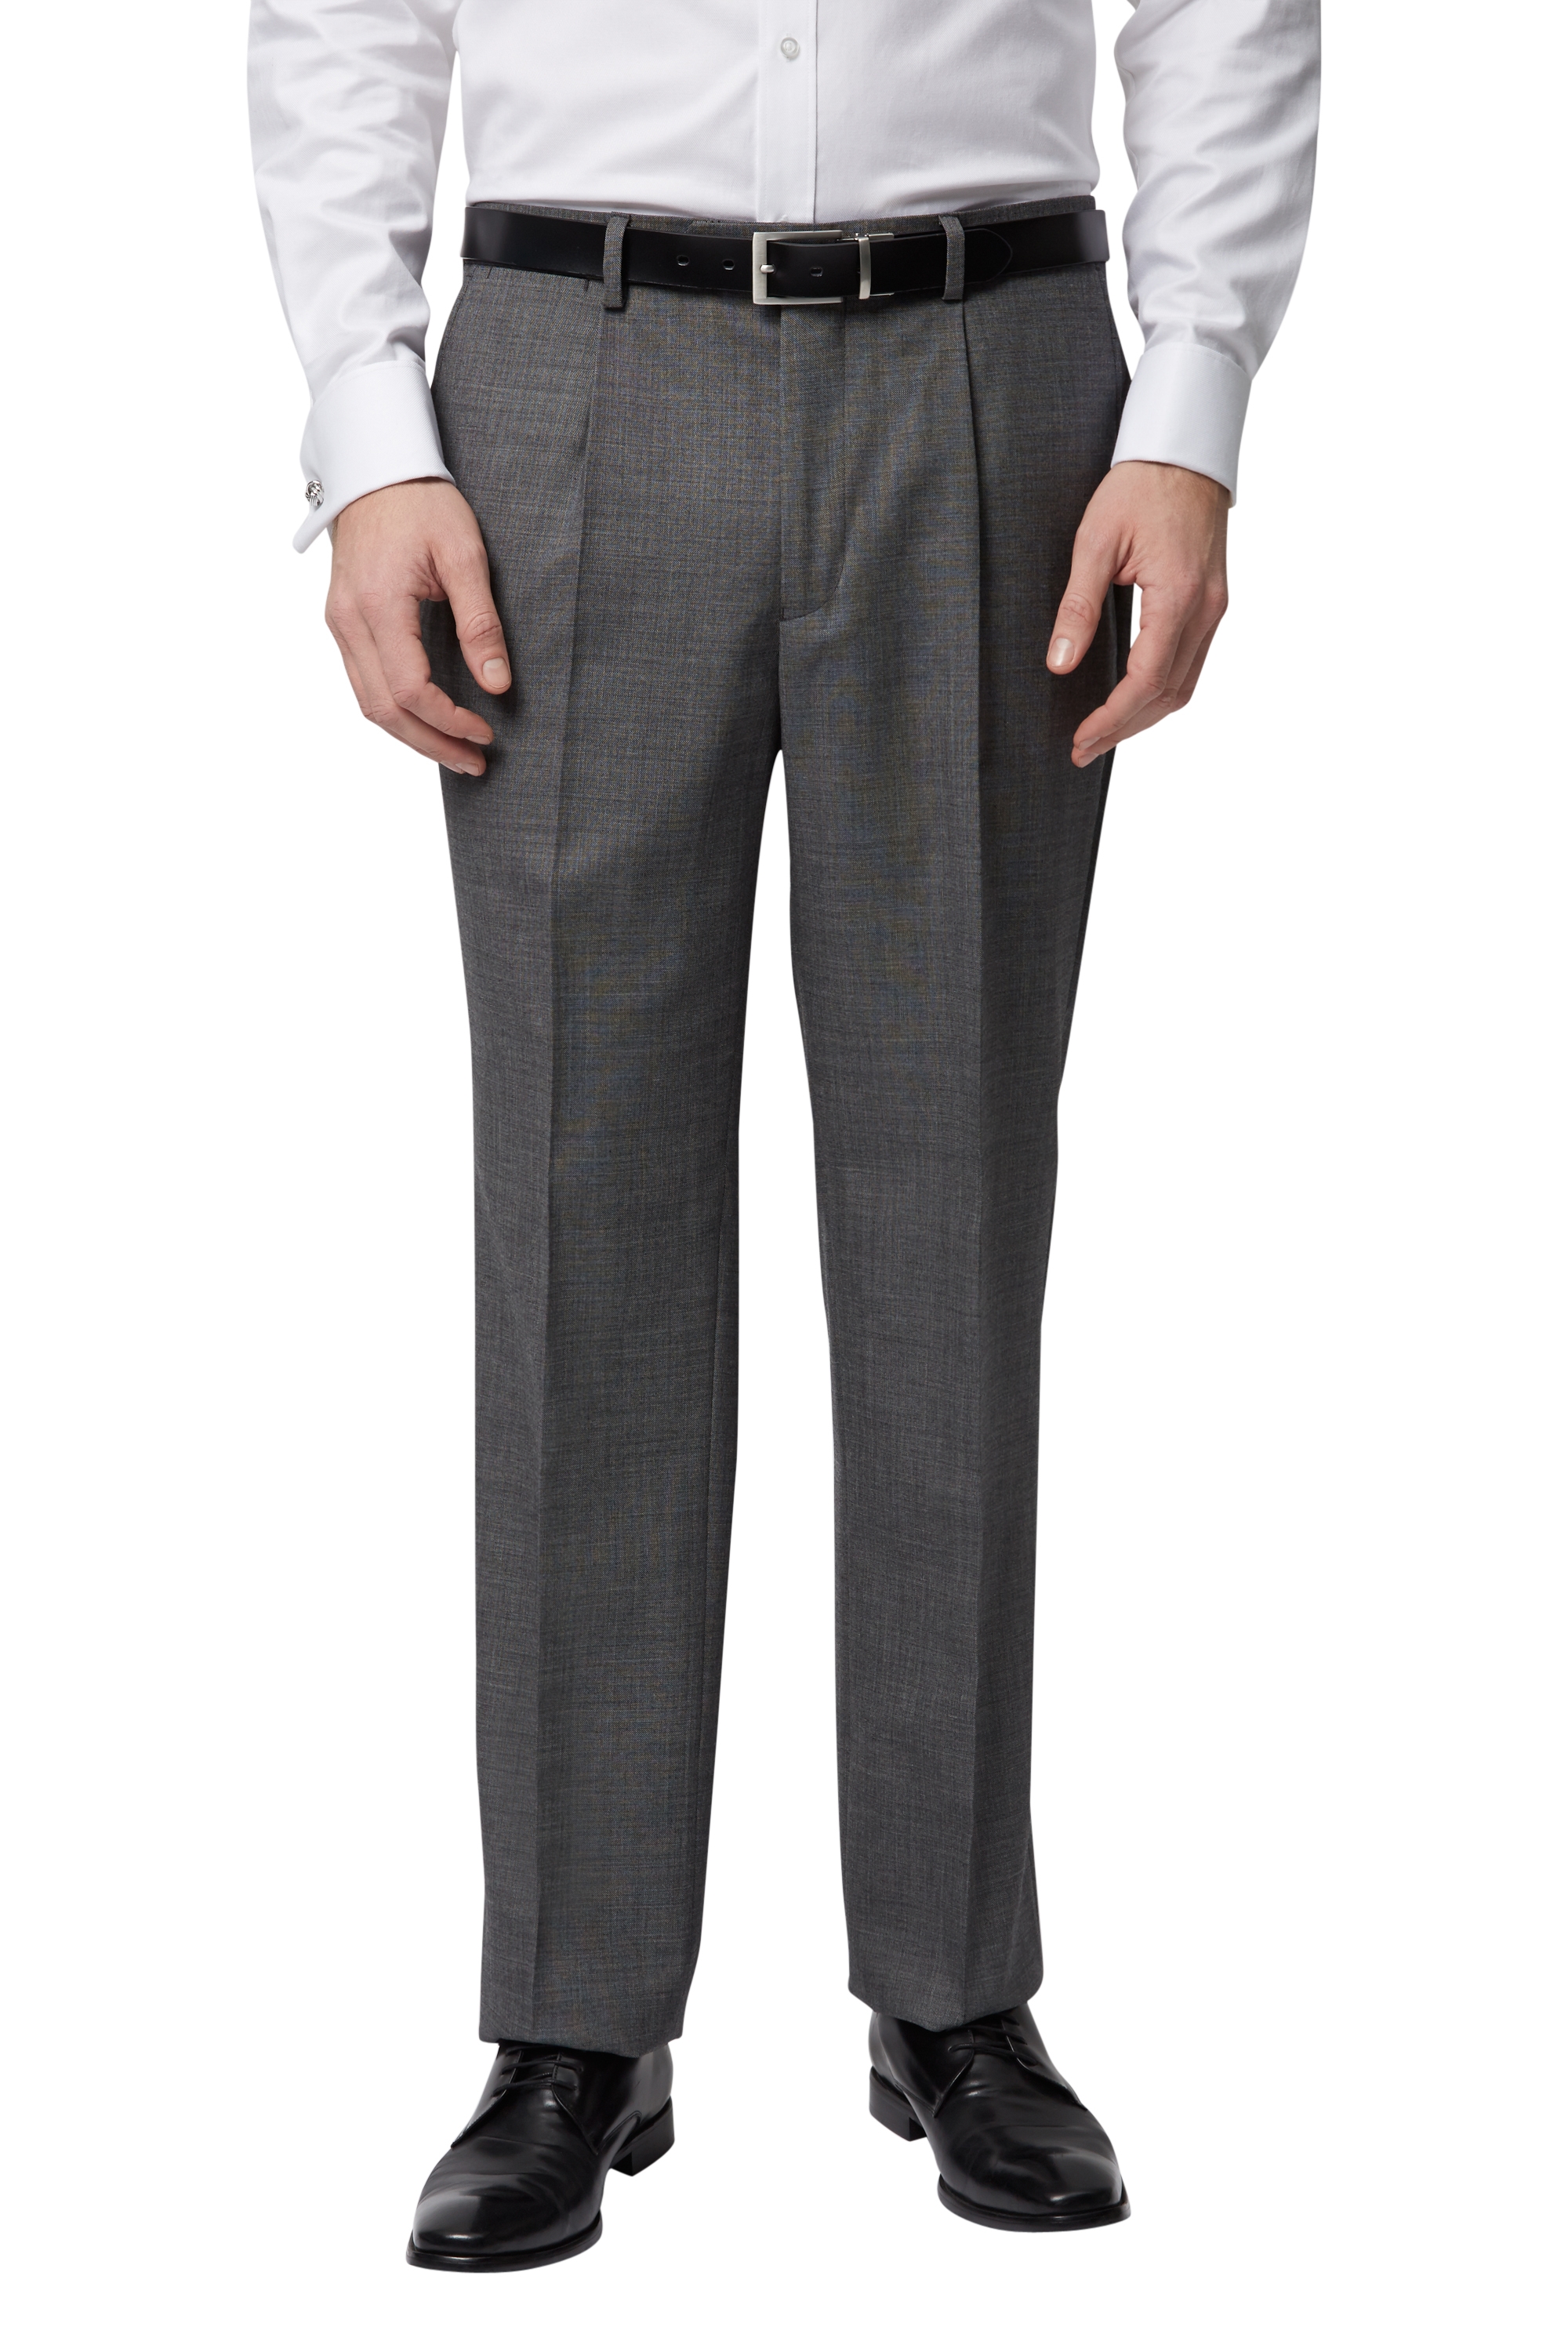 Moss Bros Regular Fit Charcoal Pleated Trousers | Buy Online at Moss